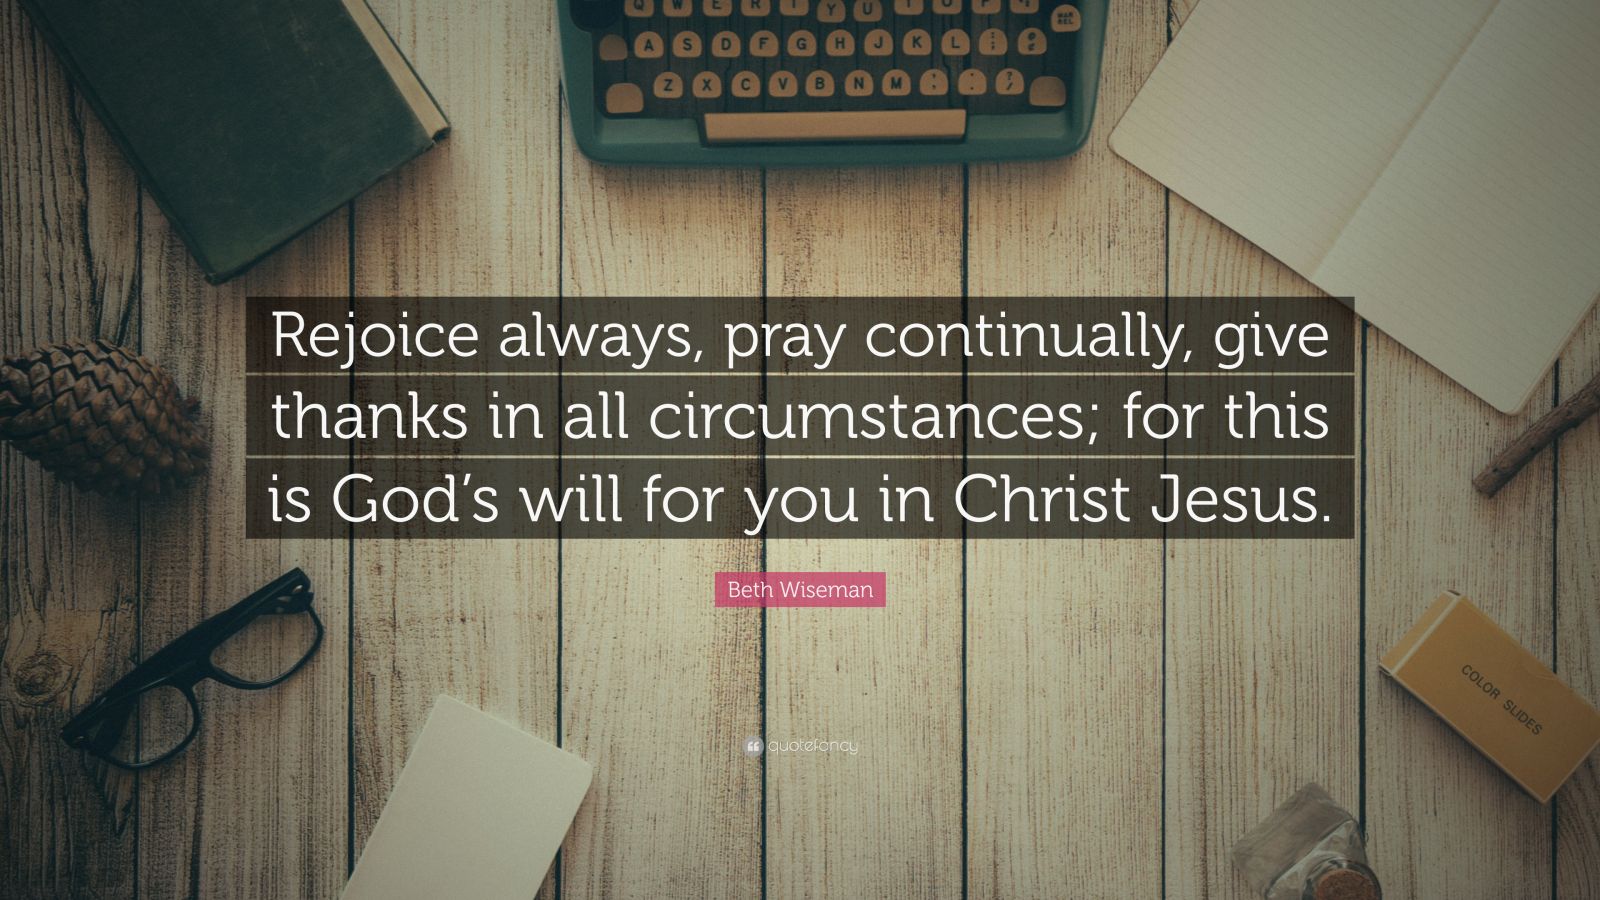 Beth Wiseman Quote: “Rejoice always, pray continually, give thanks in ...